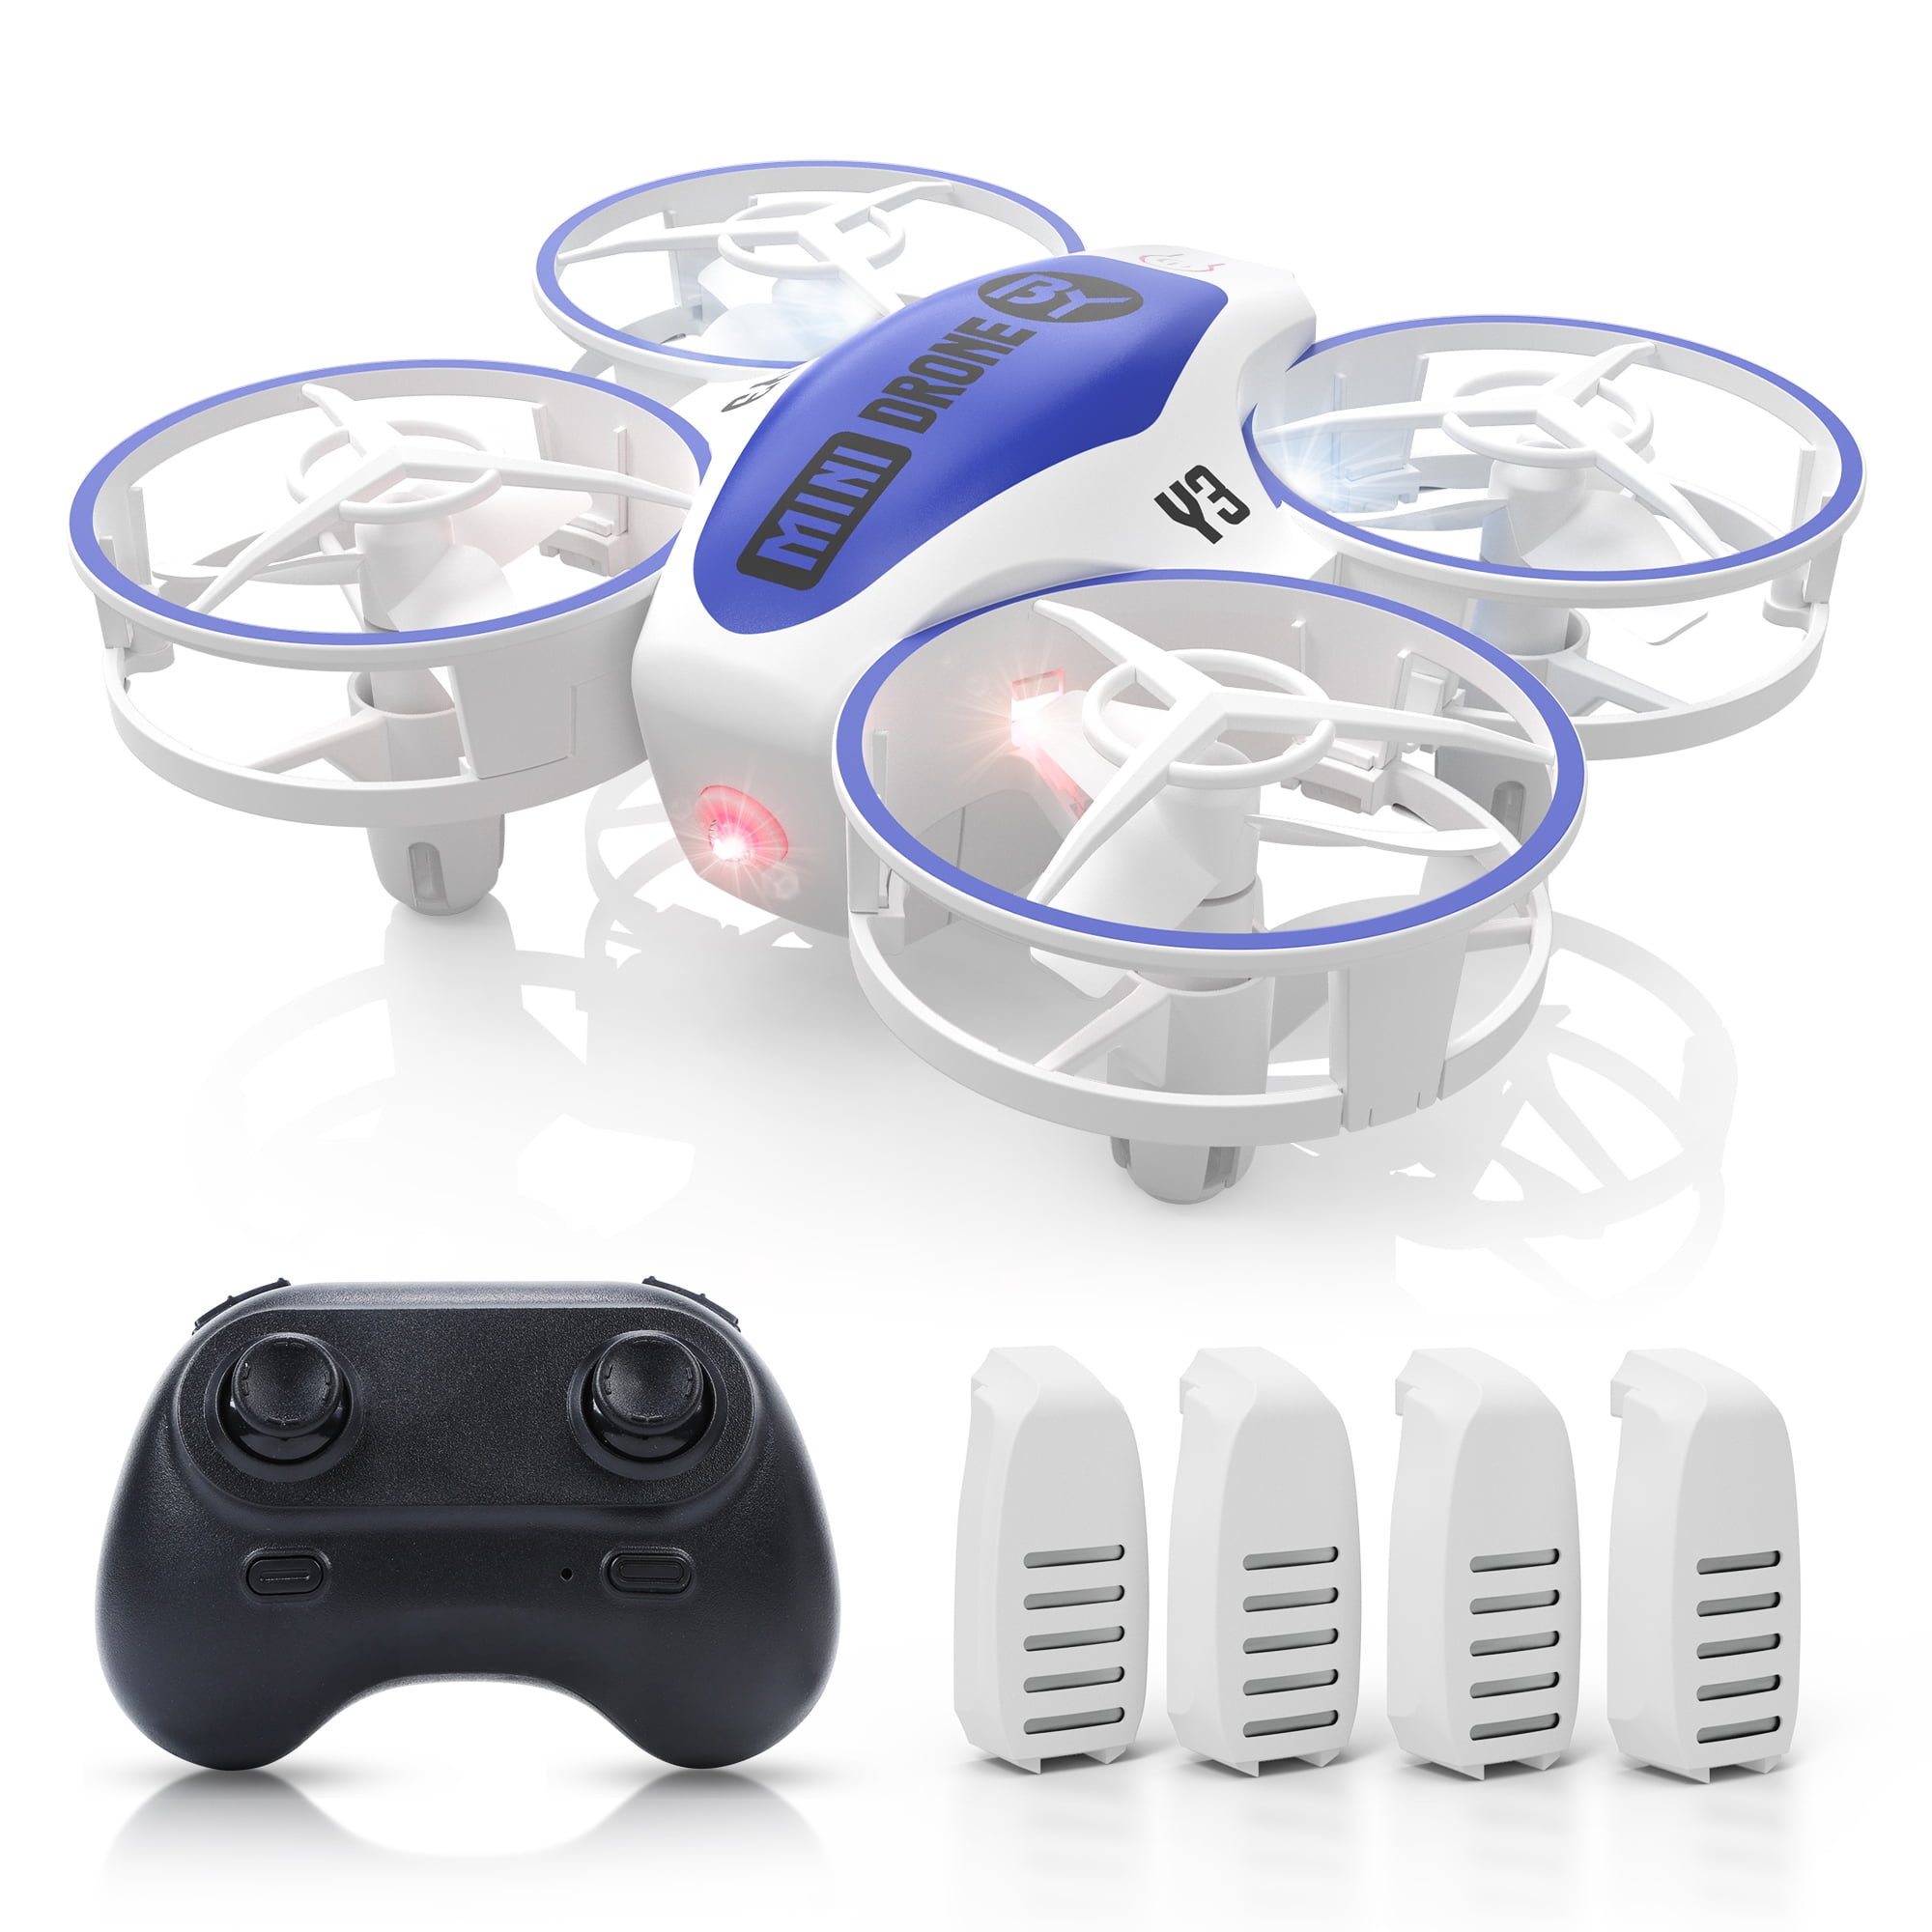 X11 Mini Drone for Kids & Beginners, Portable Hand Operated Propeller RC  Quadcopter Drone with LED Light, 4 Batteries, 3D Flip, Auto Hovering 